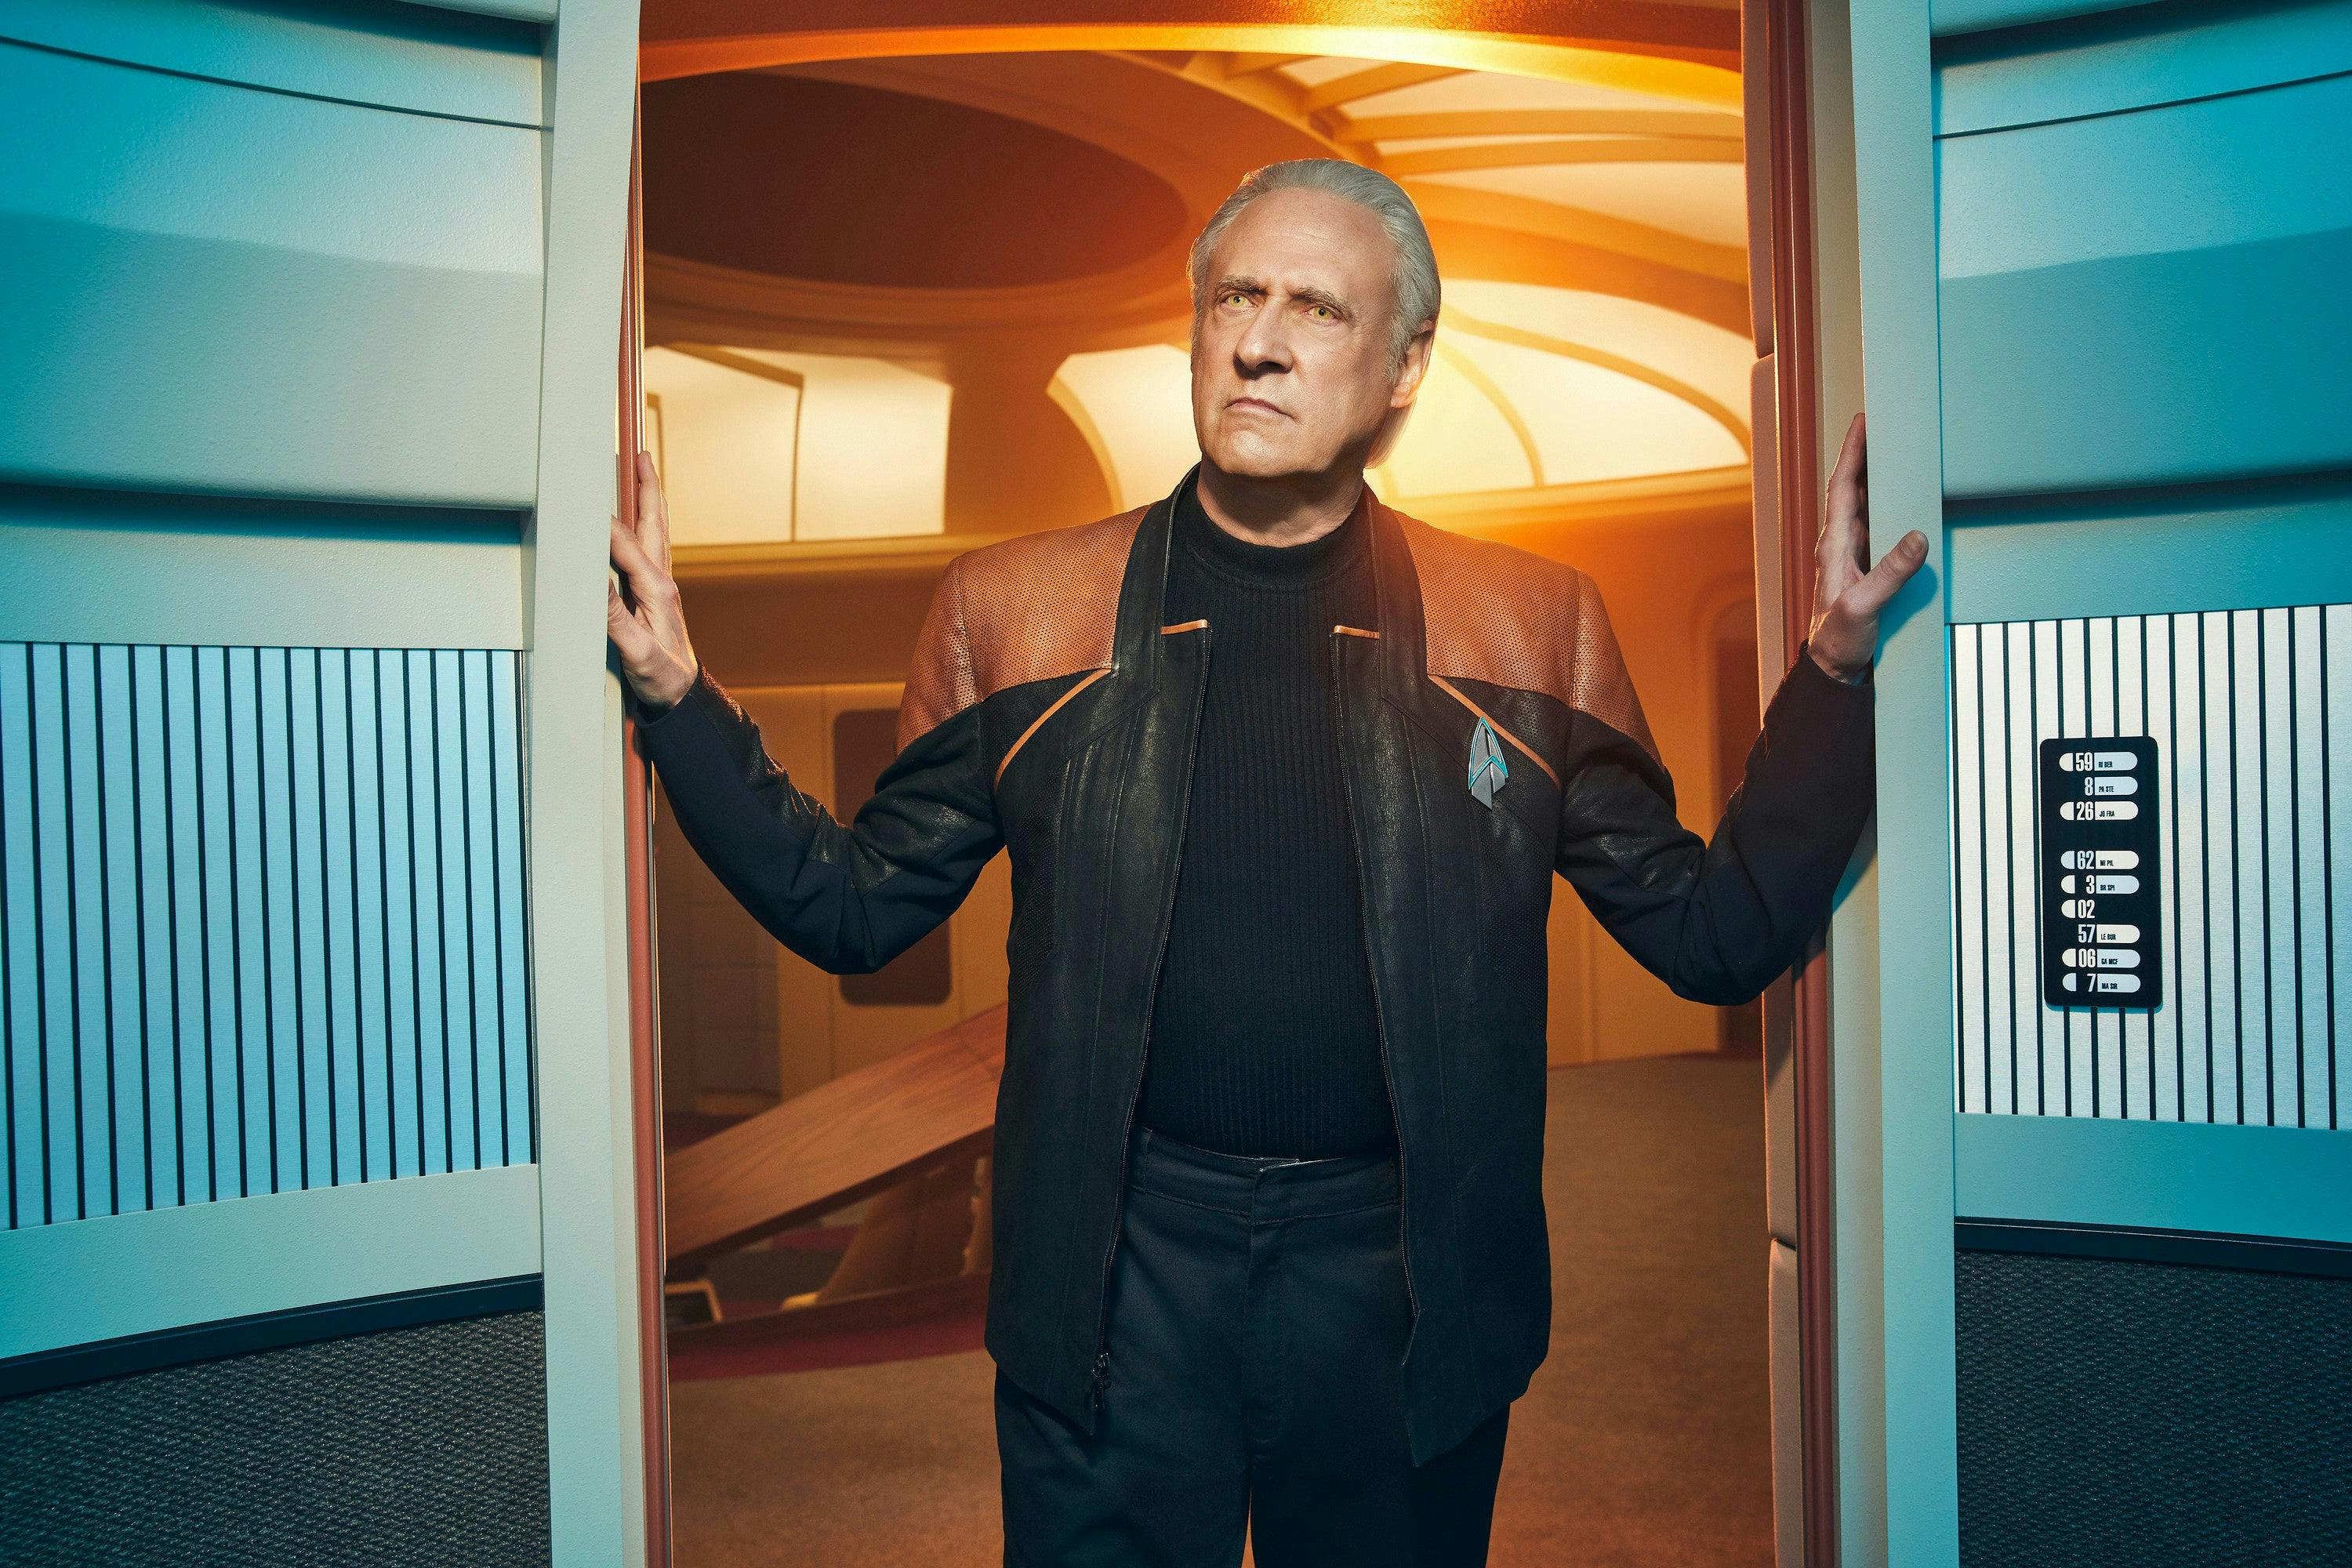 Promotional photo of Data at the entry of the turbolift with the Enterprise-D bridge behind him with both hands on the sides of the lift frame